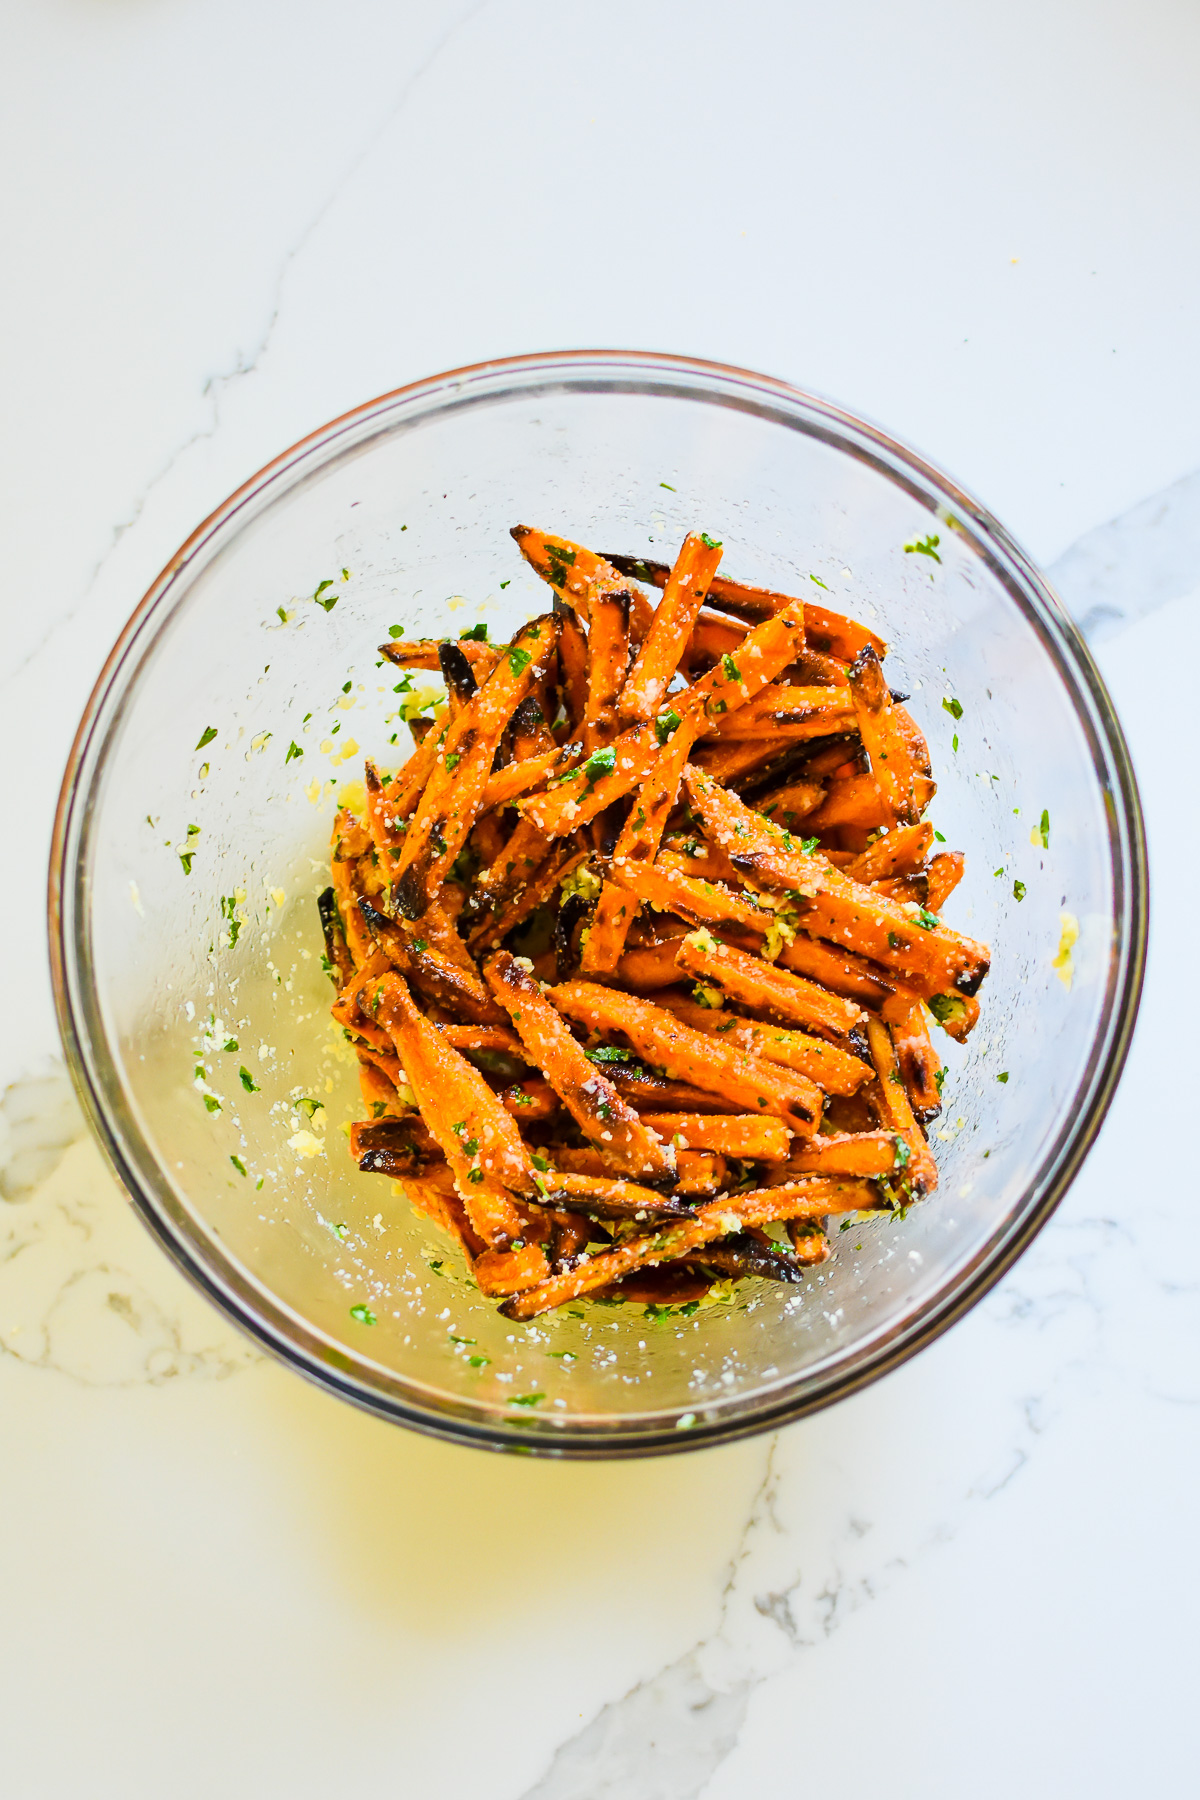 sweet potato fries tossed in garlic herb butter and parmesan cheese in glass mixing bowl.